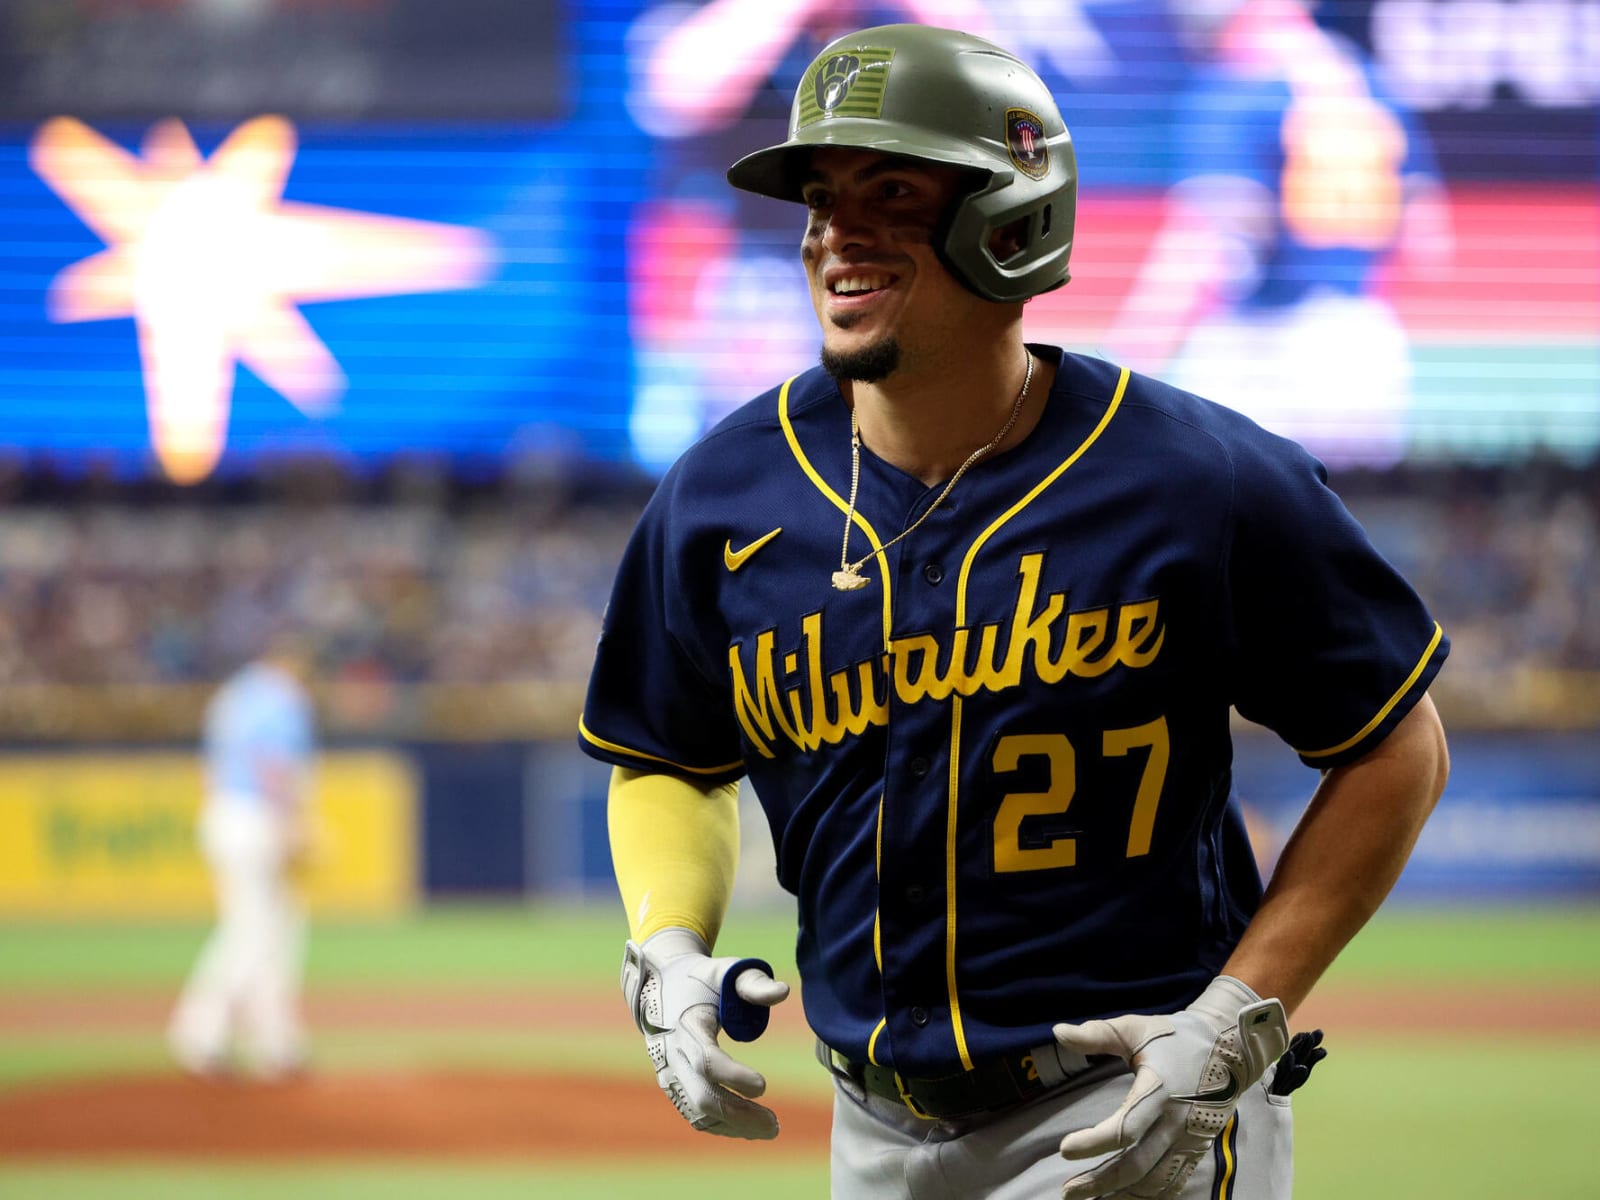 Brewers place shortstop Willy Adames on concussion list after hit